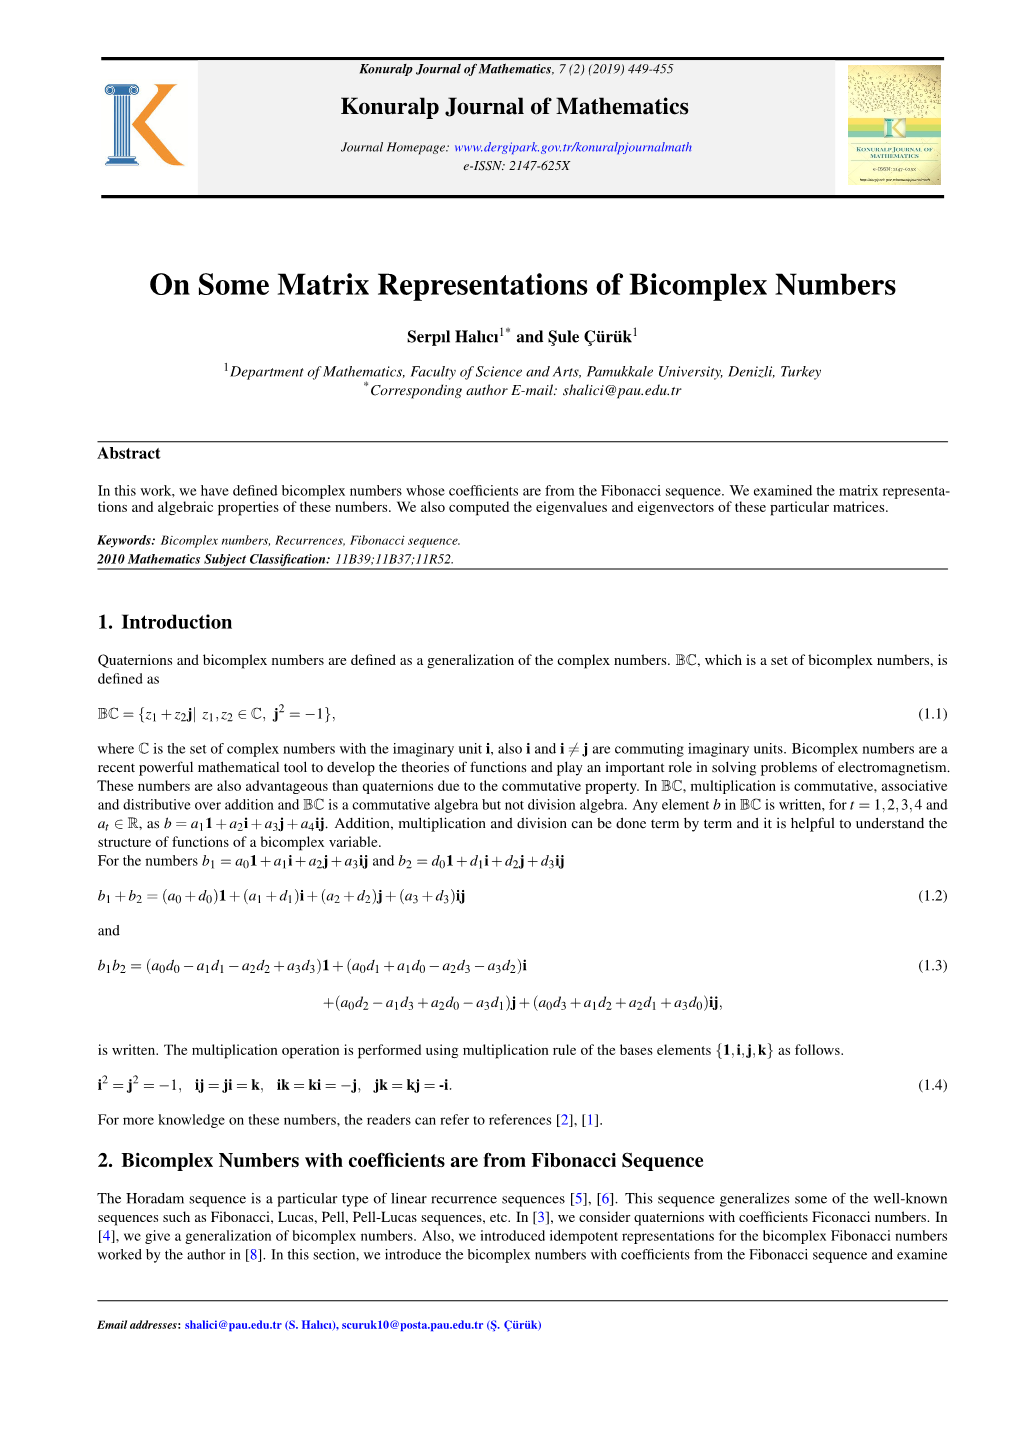 On Some Matrix Representations of Bicomplex Numbers